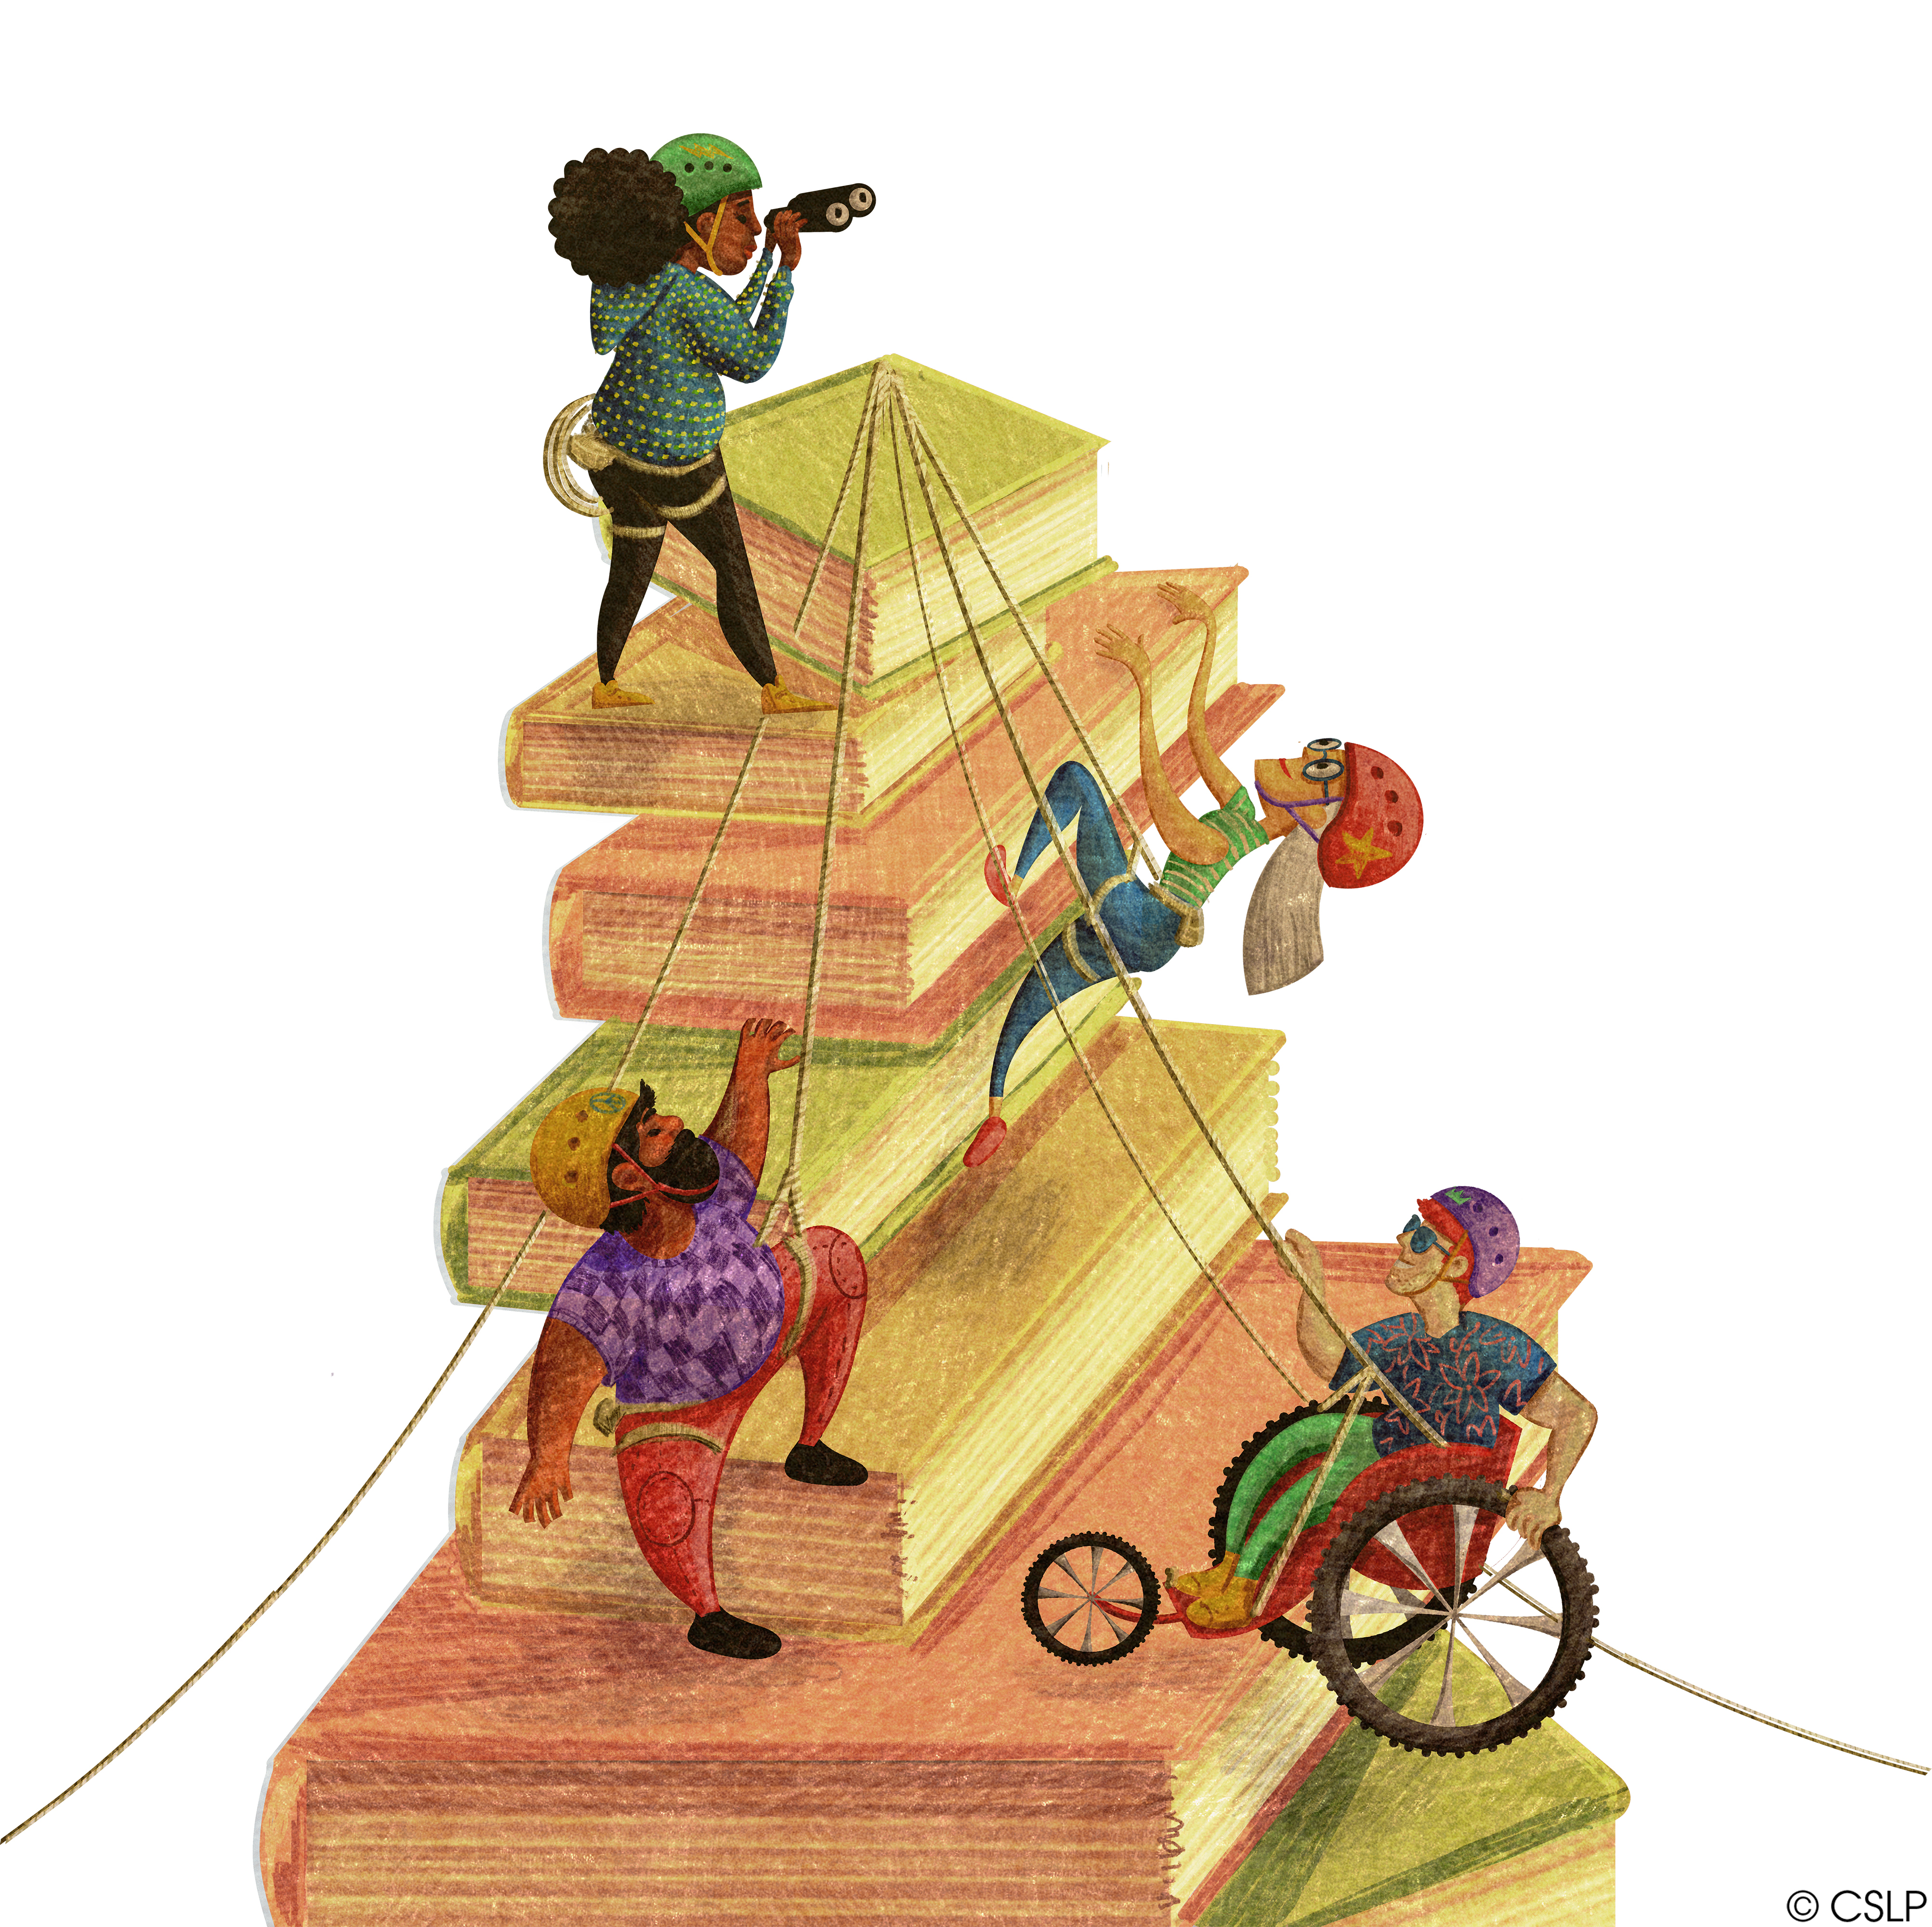 Family climbing and exploring books